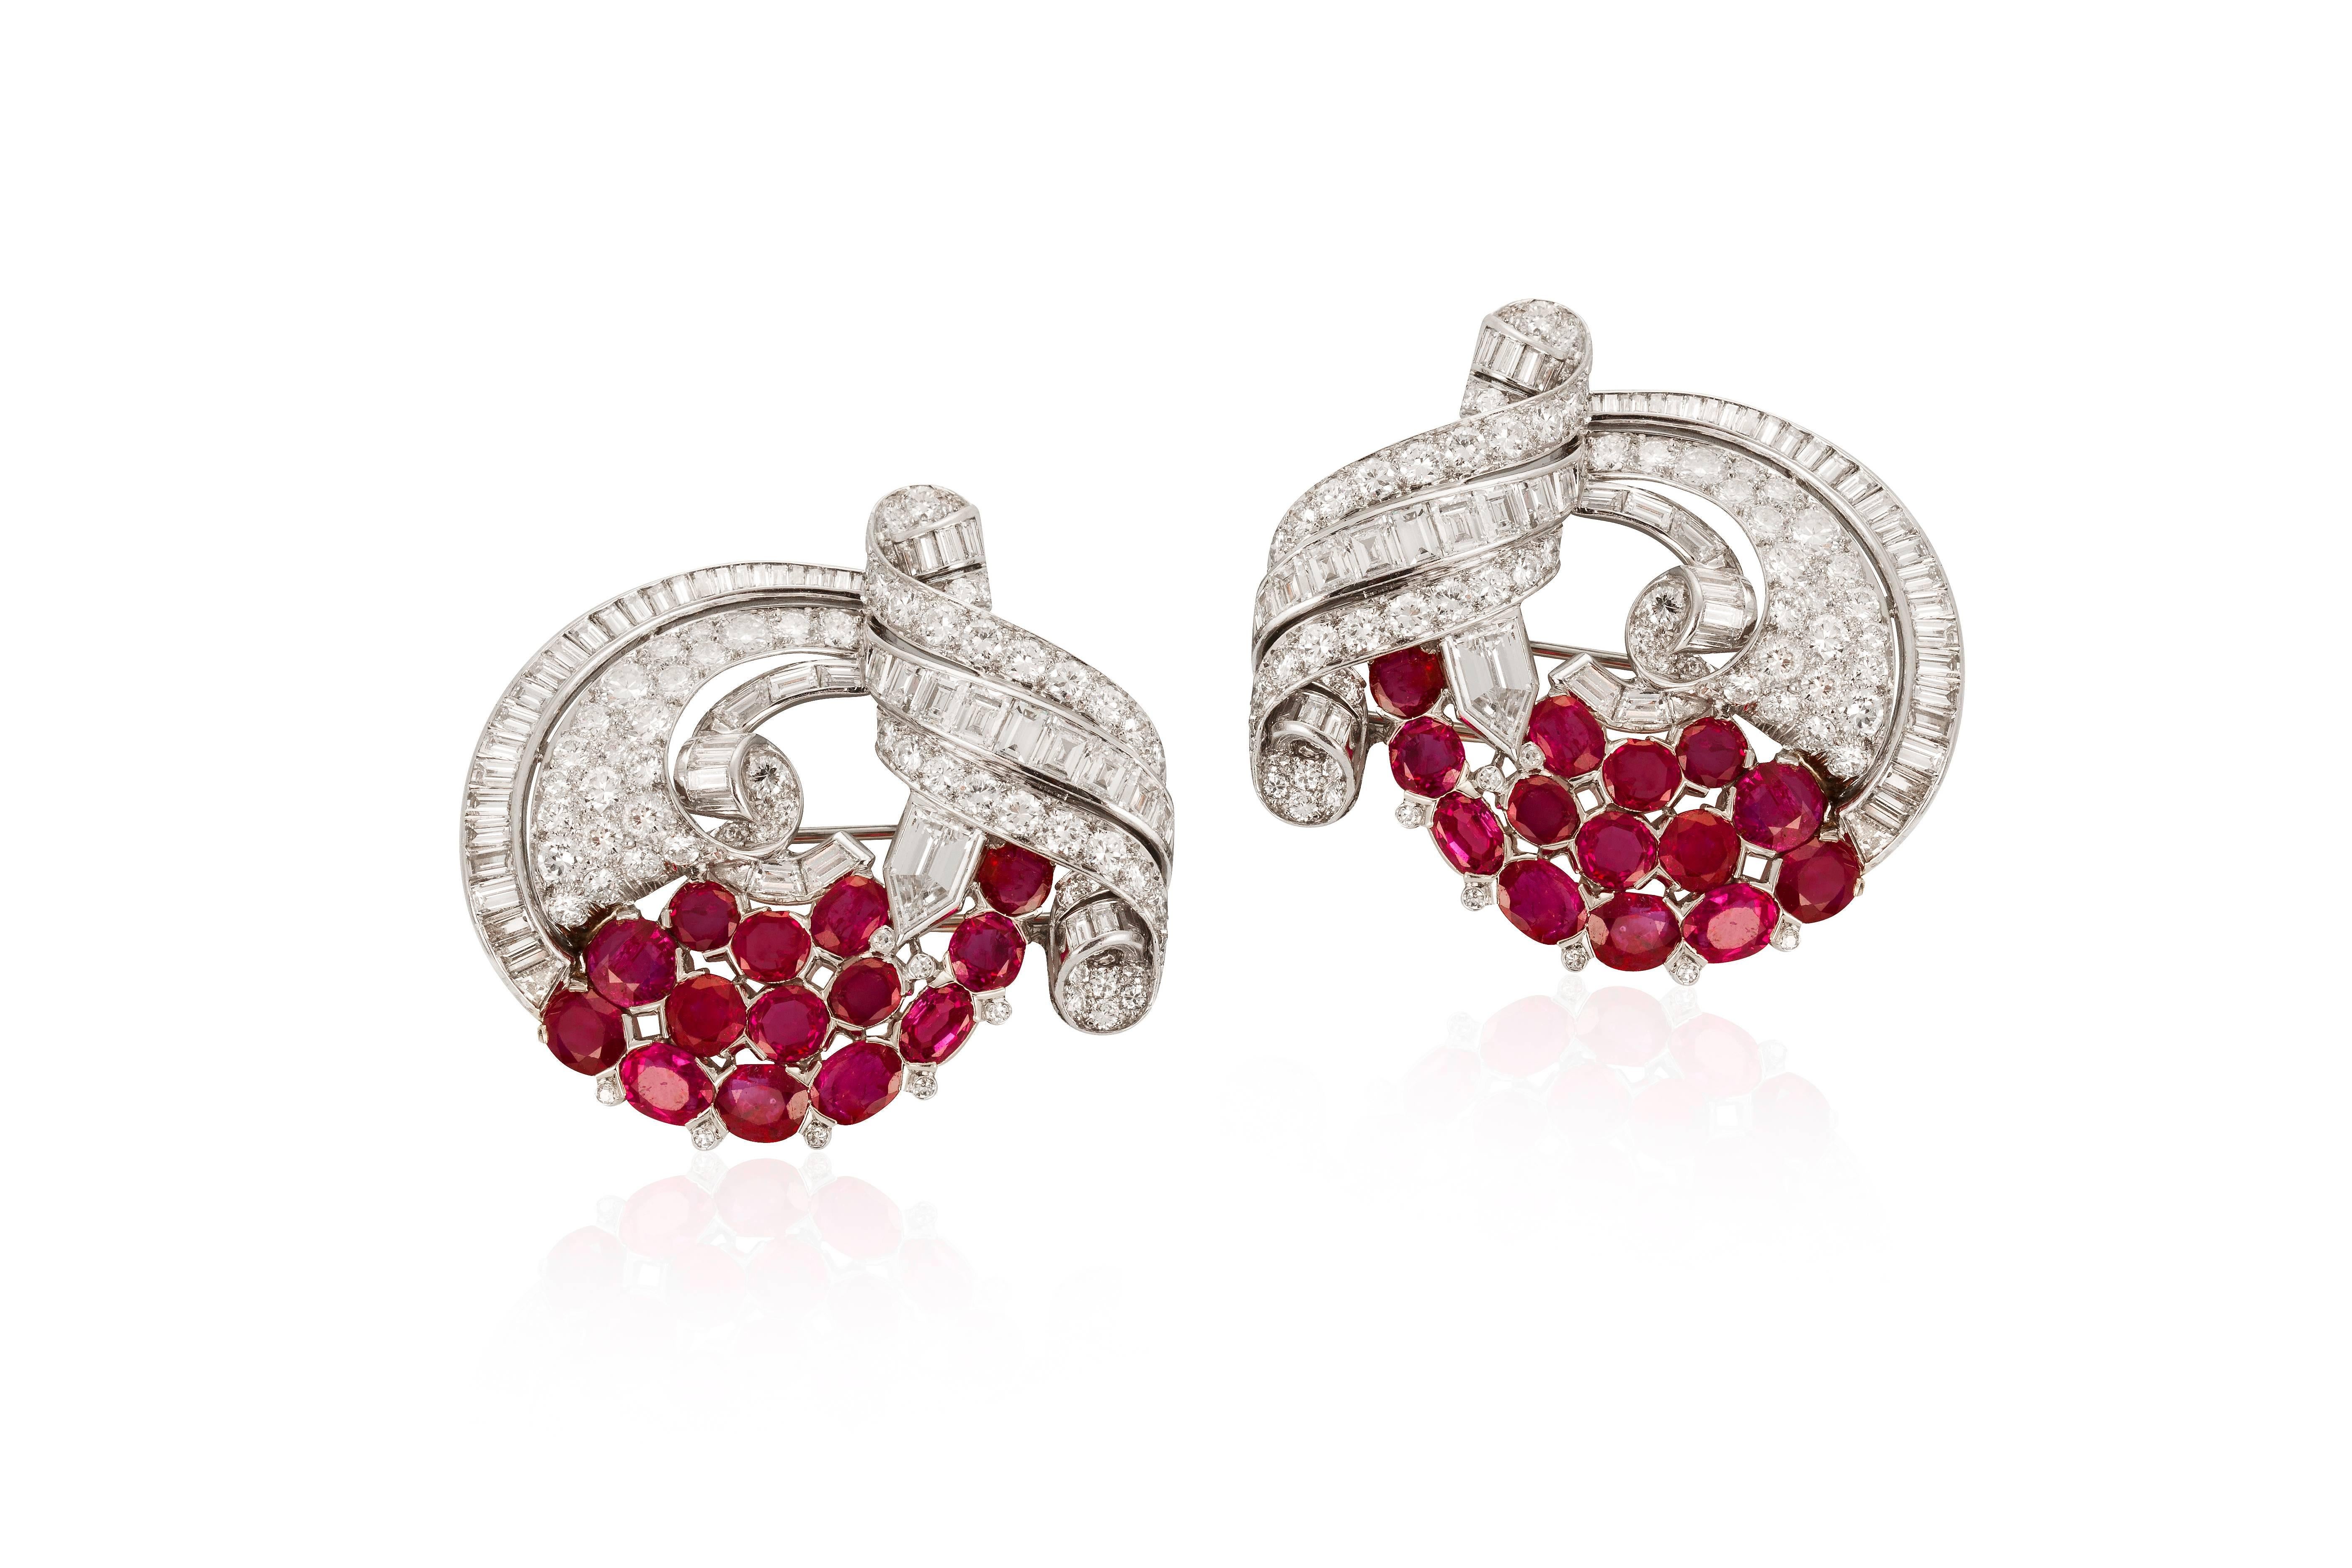 Two matching clips featuring exceptional rubies weighing an estimated 12.60 carats and baguette and round diamonds weighing an estimated 15 carats can be worn individually or combined to form a single very important pin.

Dimensions: 	3” x 1 ⅞”